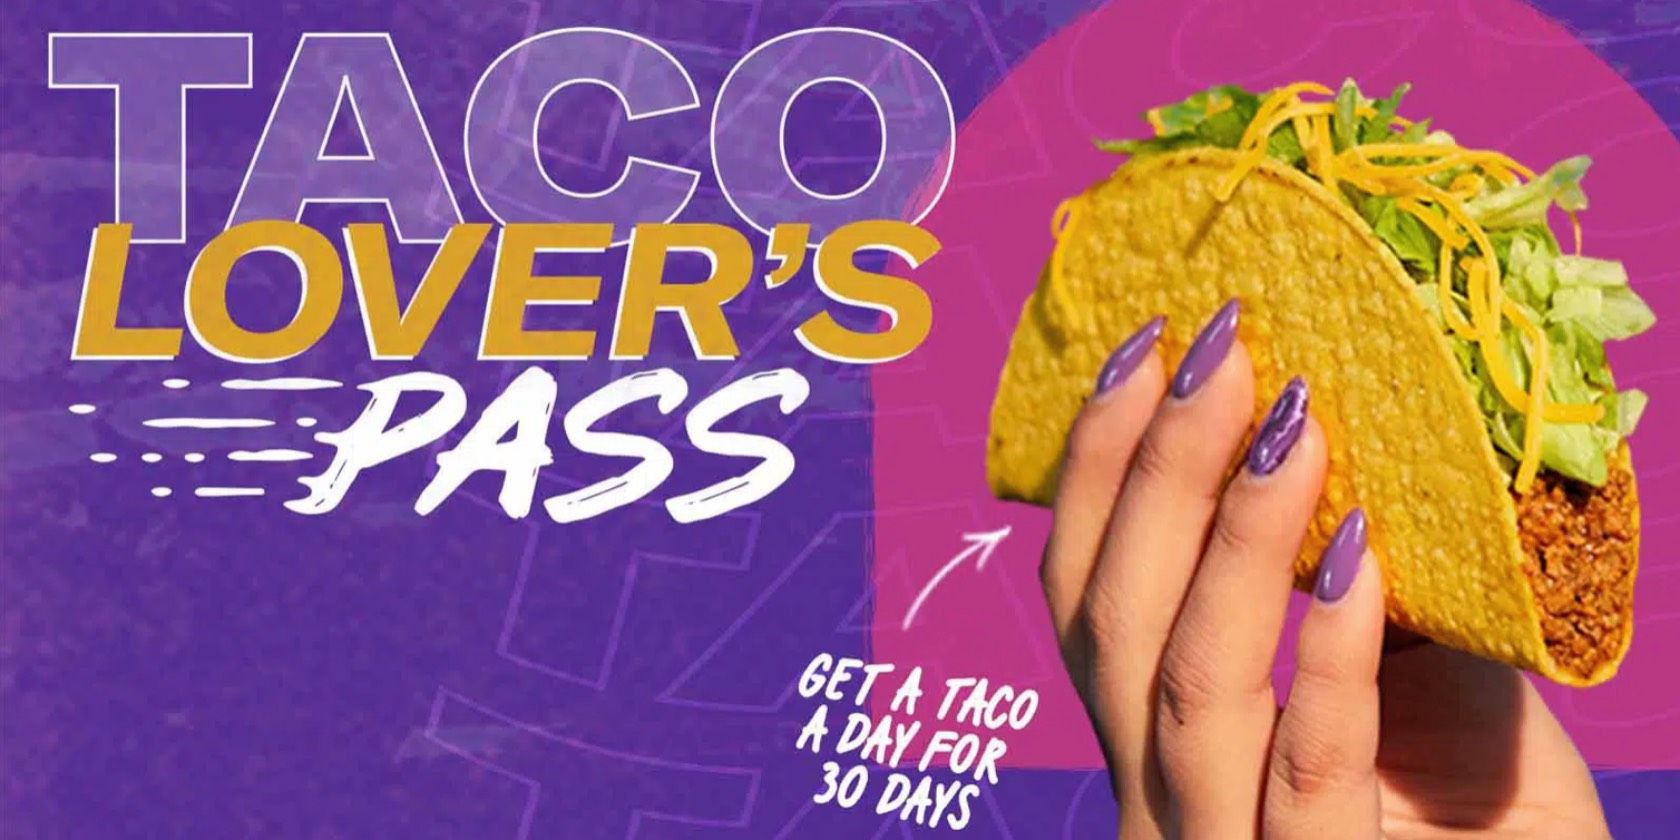 Is One Free Taco a Day Enough Reason to Cancel Netflix?